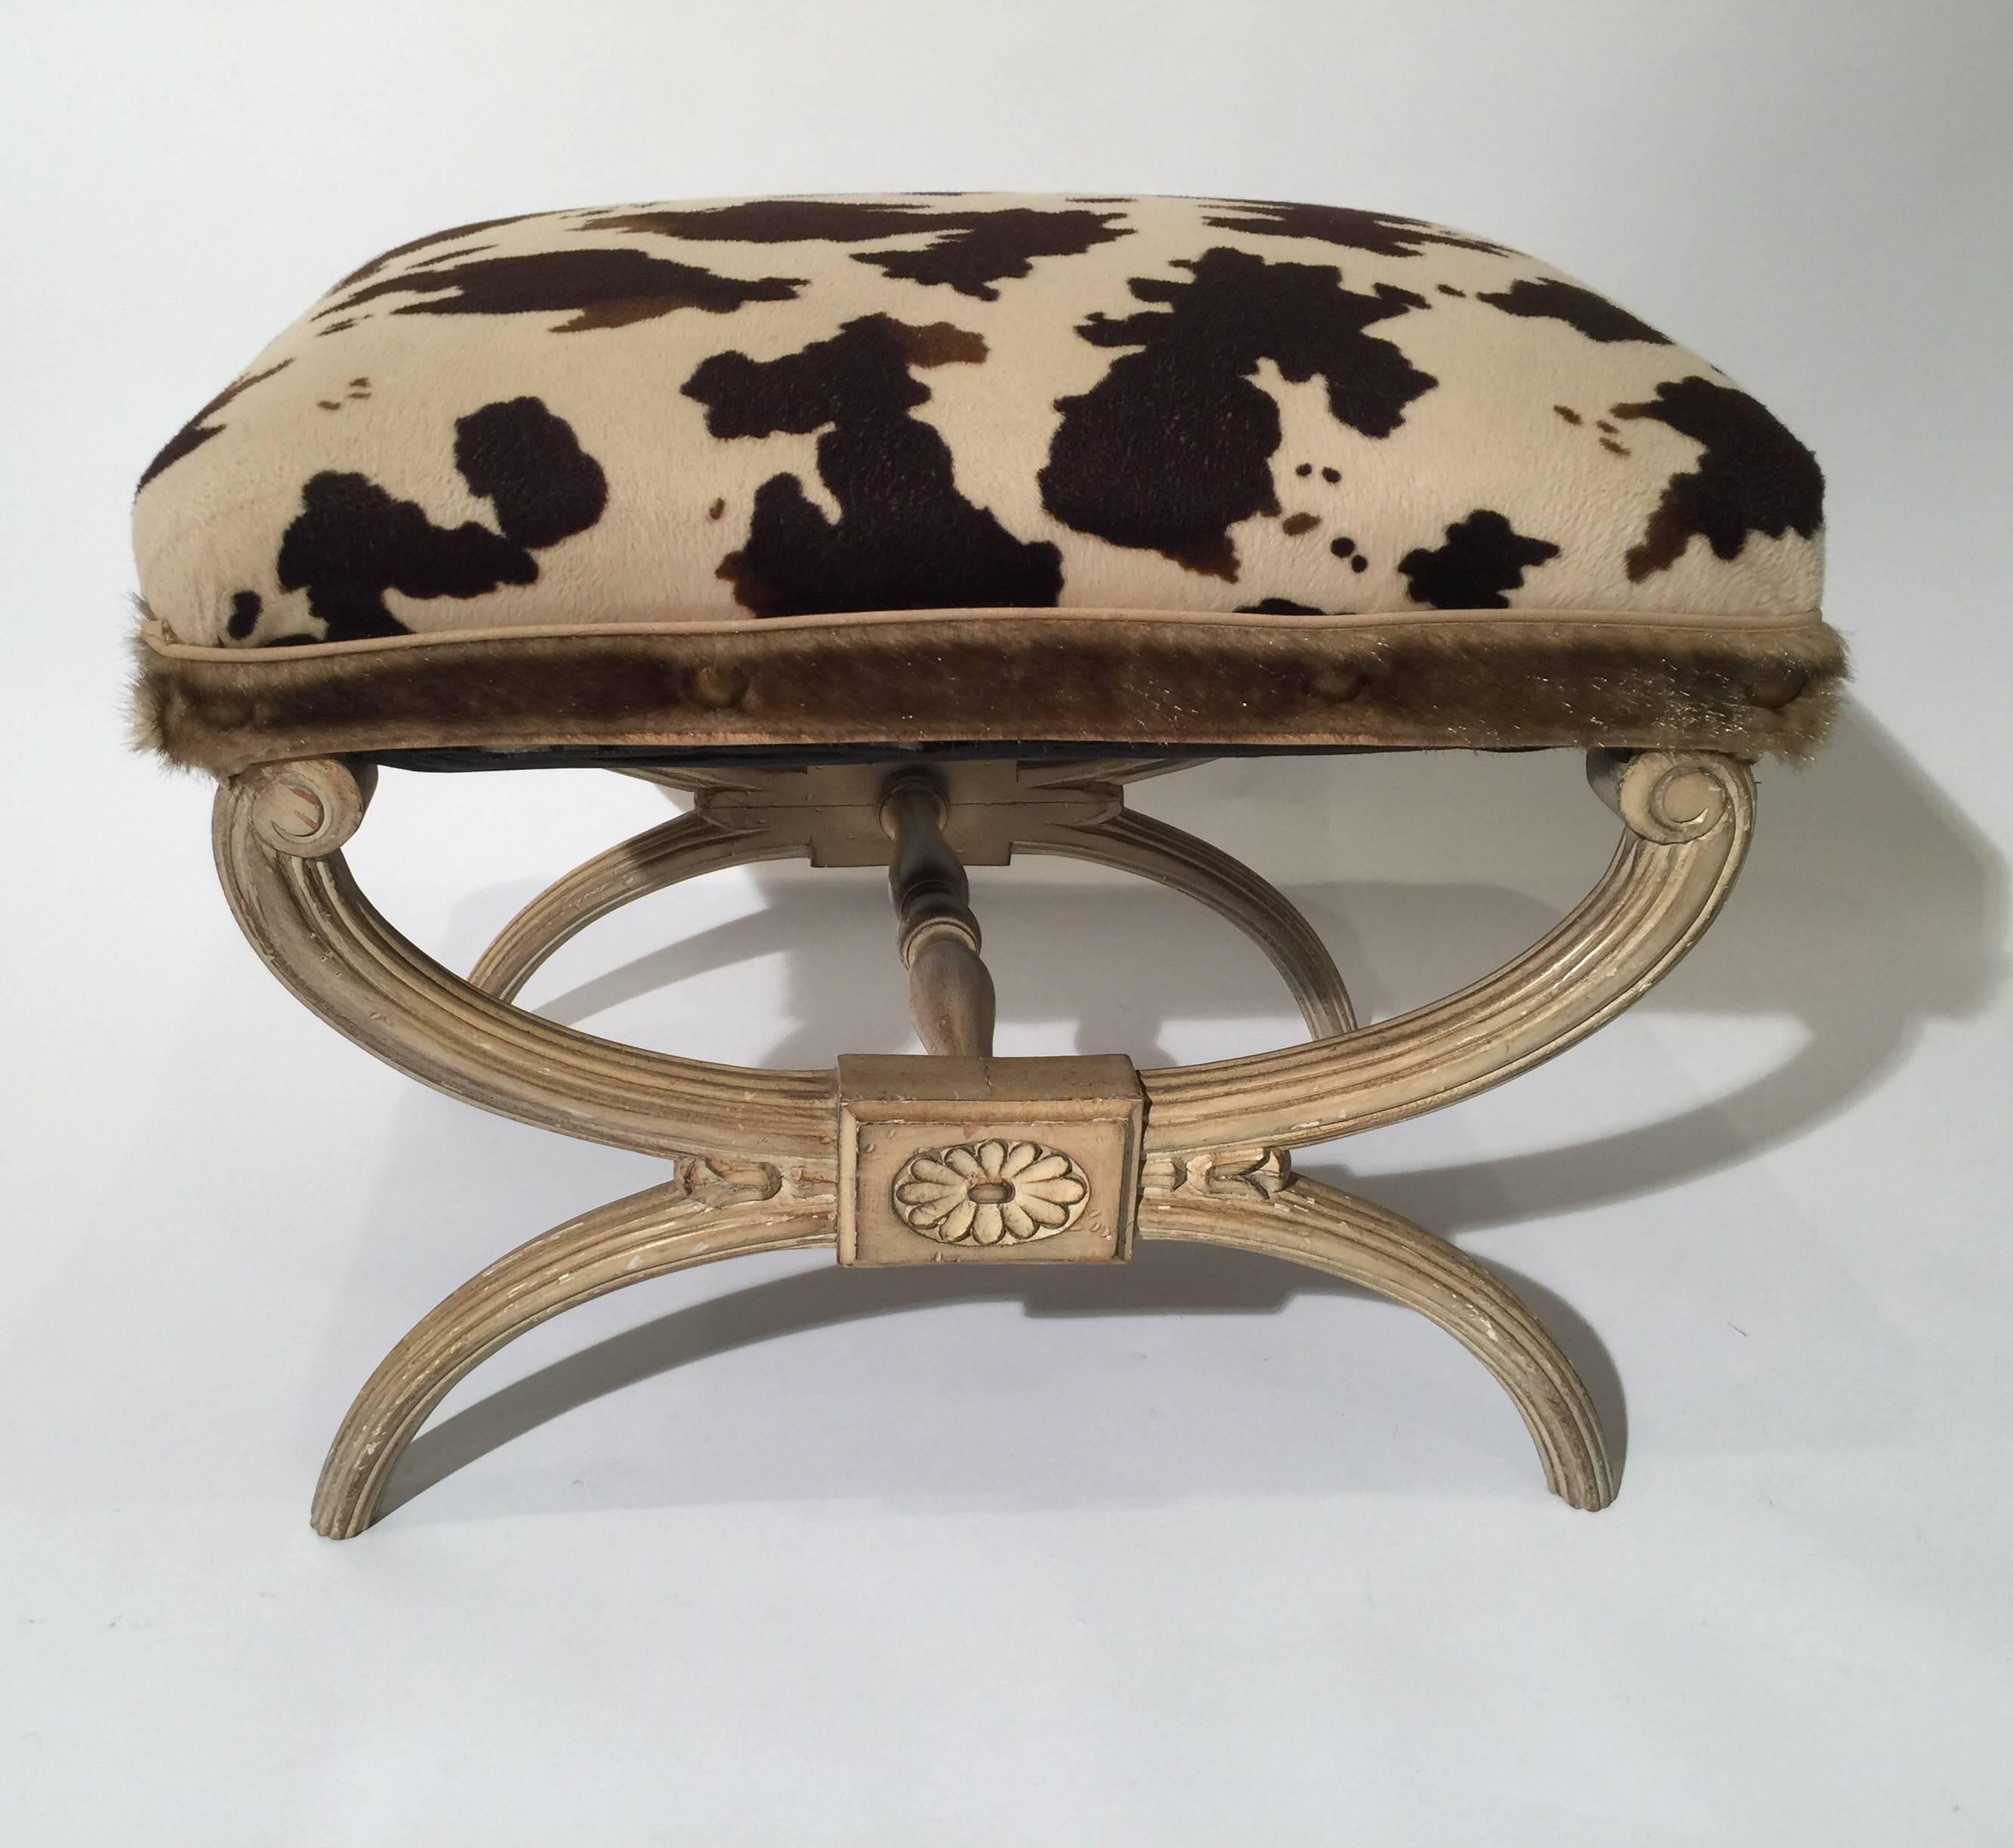 High style designer X Bench with hand carved painted wood base.  The fabric is a short plush animal print covering with a faux fur trim .  Italian, Mid 20th Century